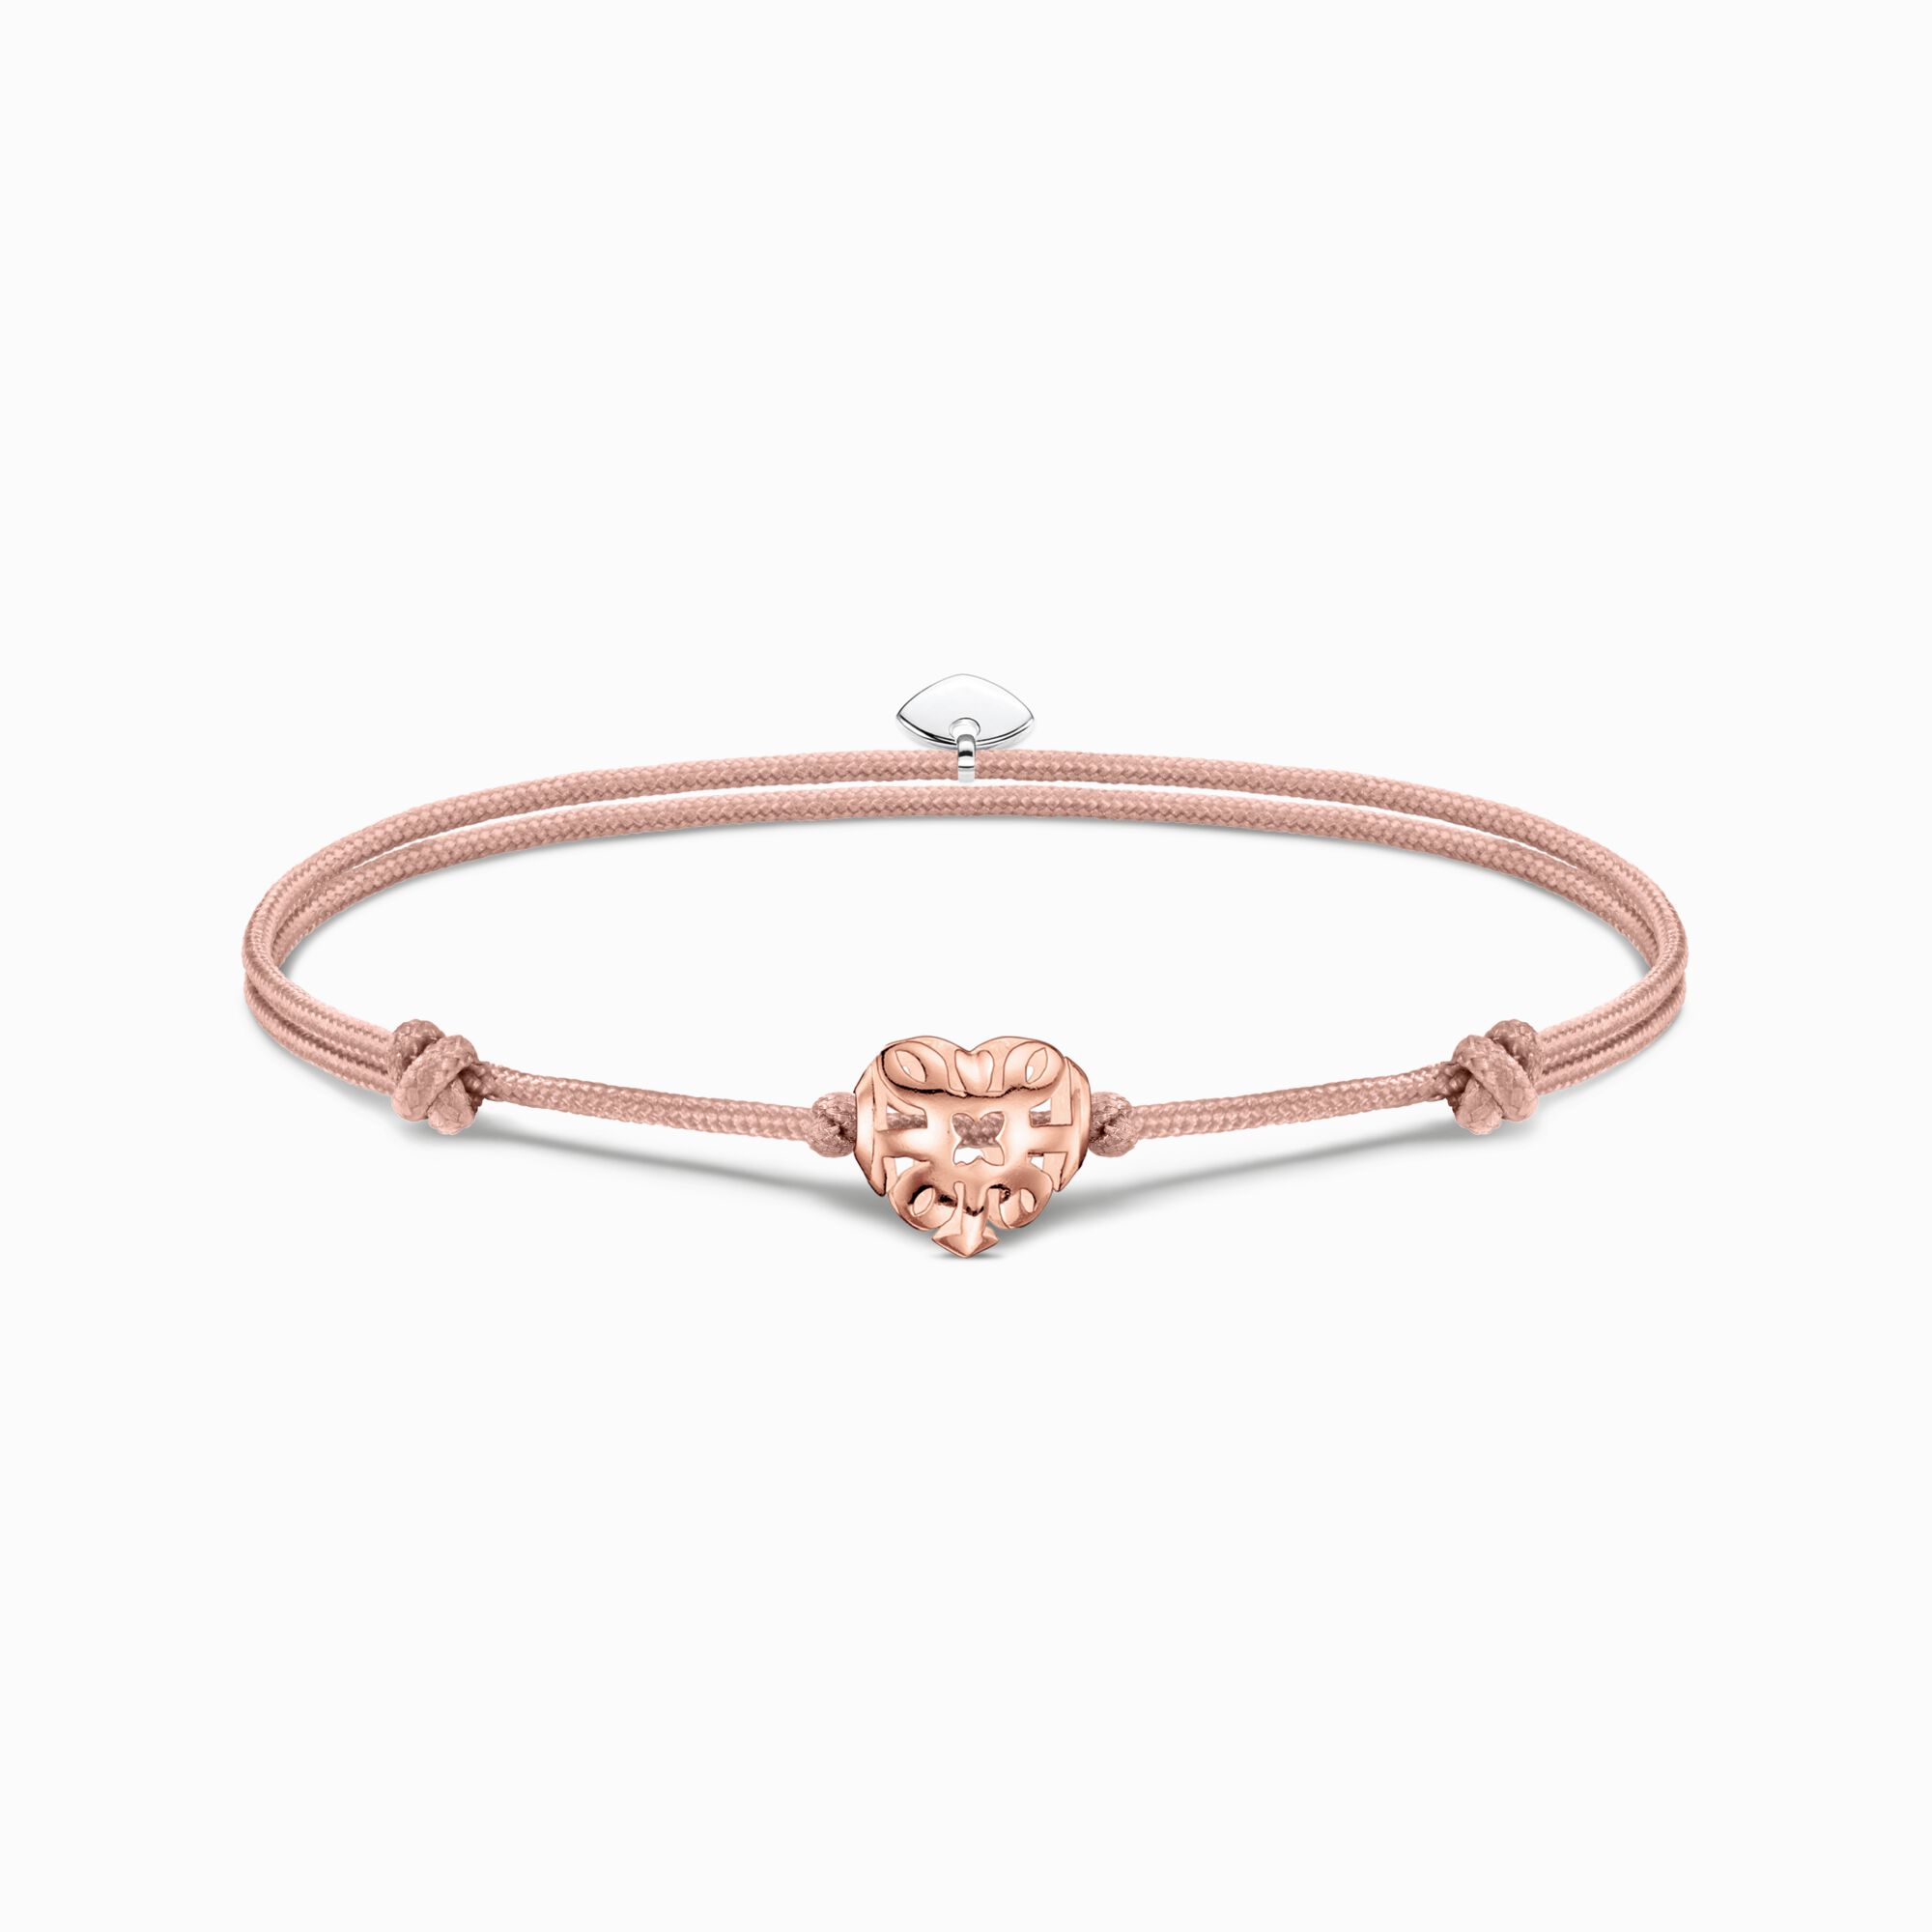 Bracelet Karma Secret with heart Bead rose gold plated from the Karma Beads collection in the THOMAS SABO online store